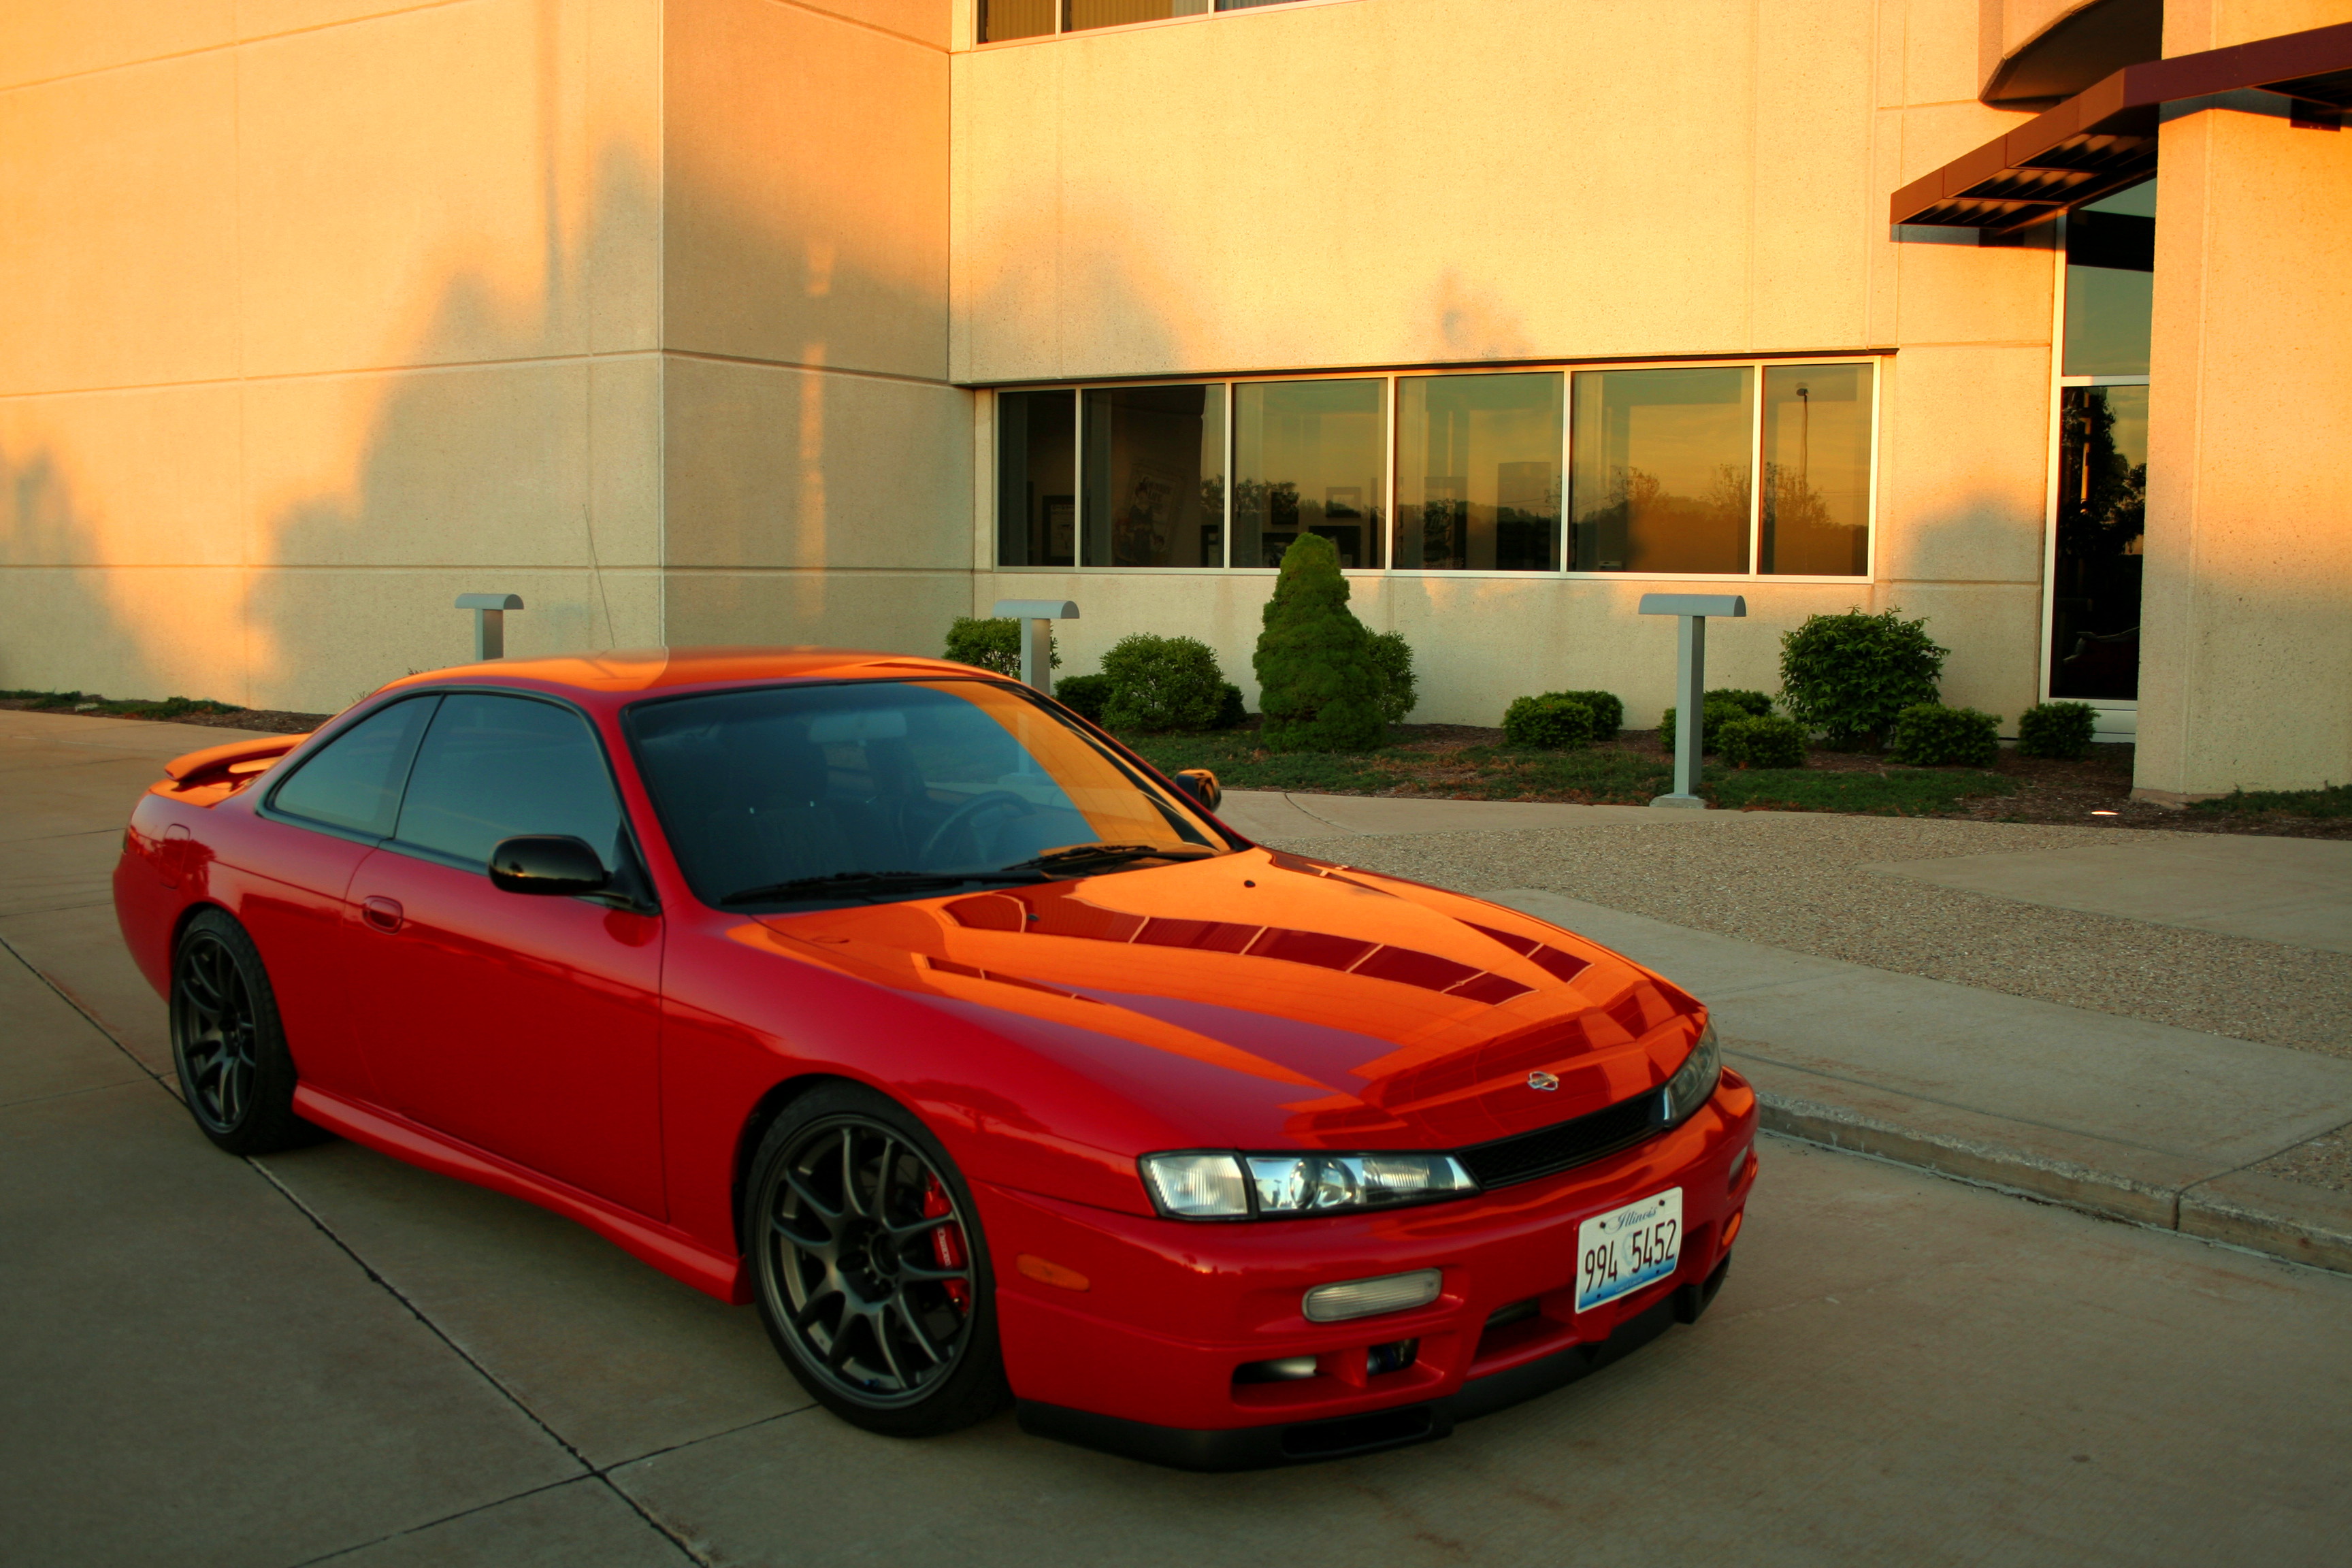 S14 For Sale